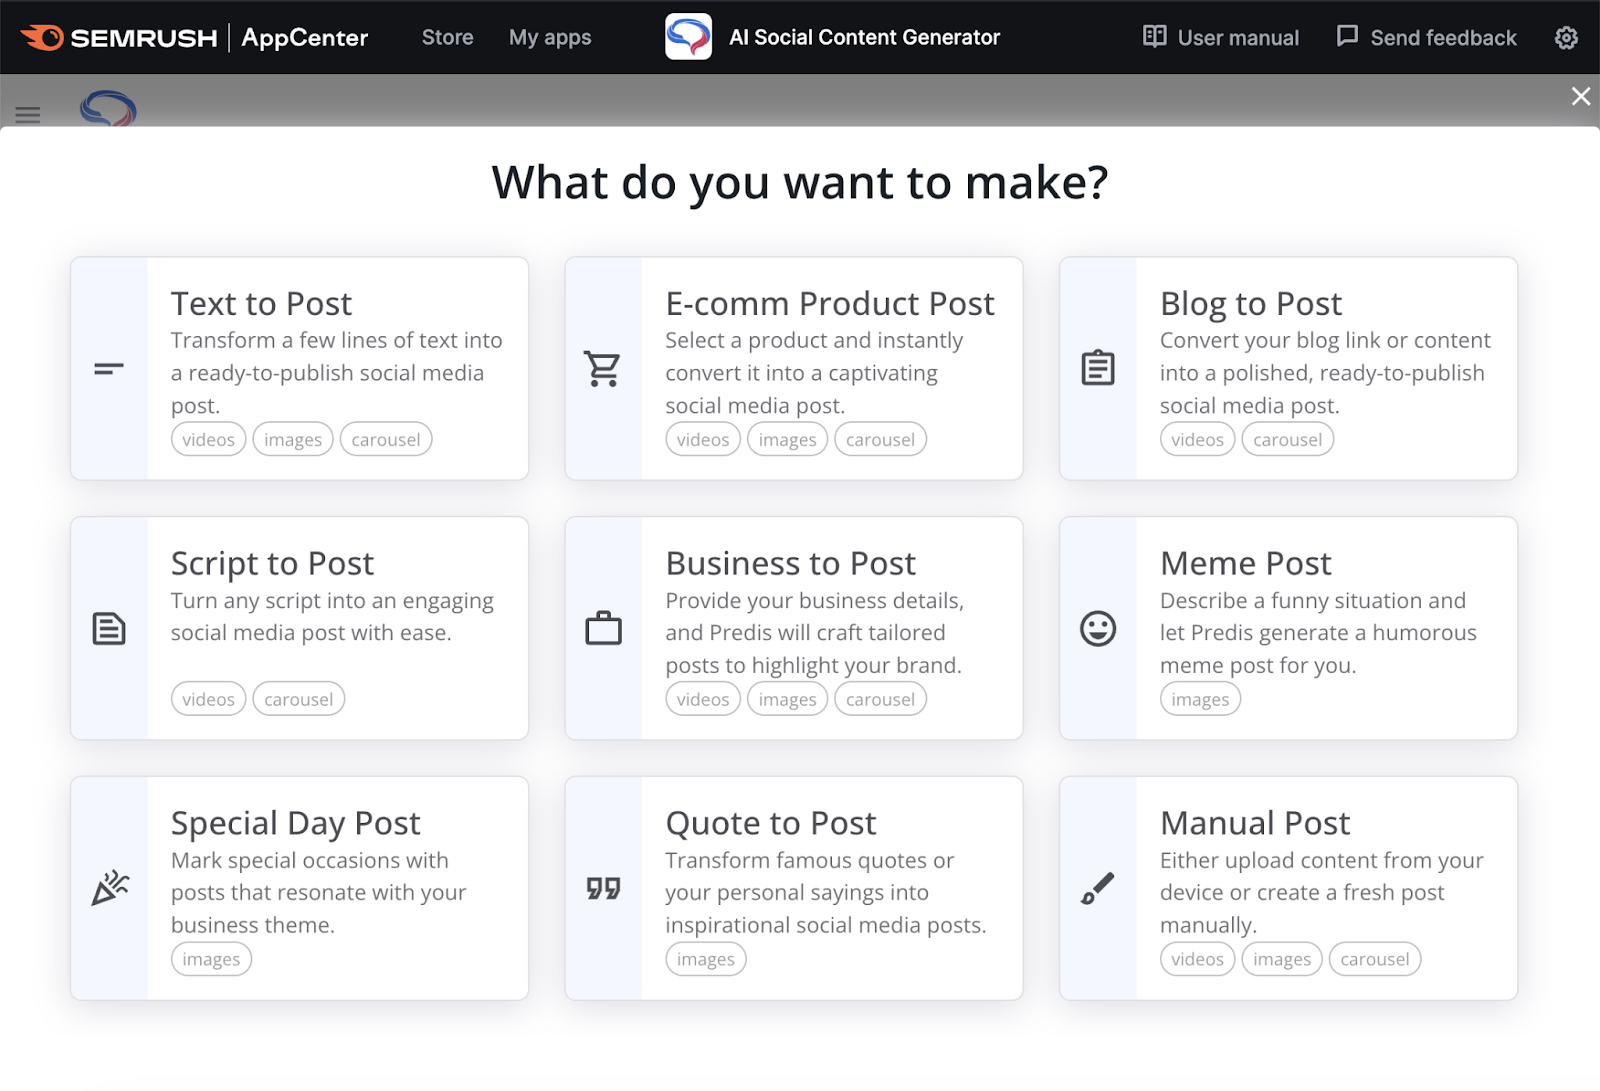 AI social content generator tool format options such as text to post, quote to post, meme post, and blog to post.